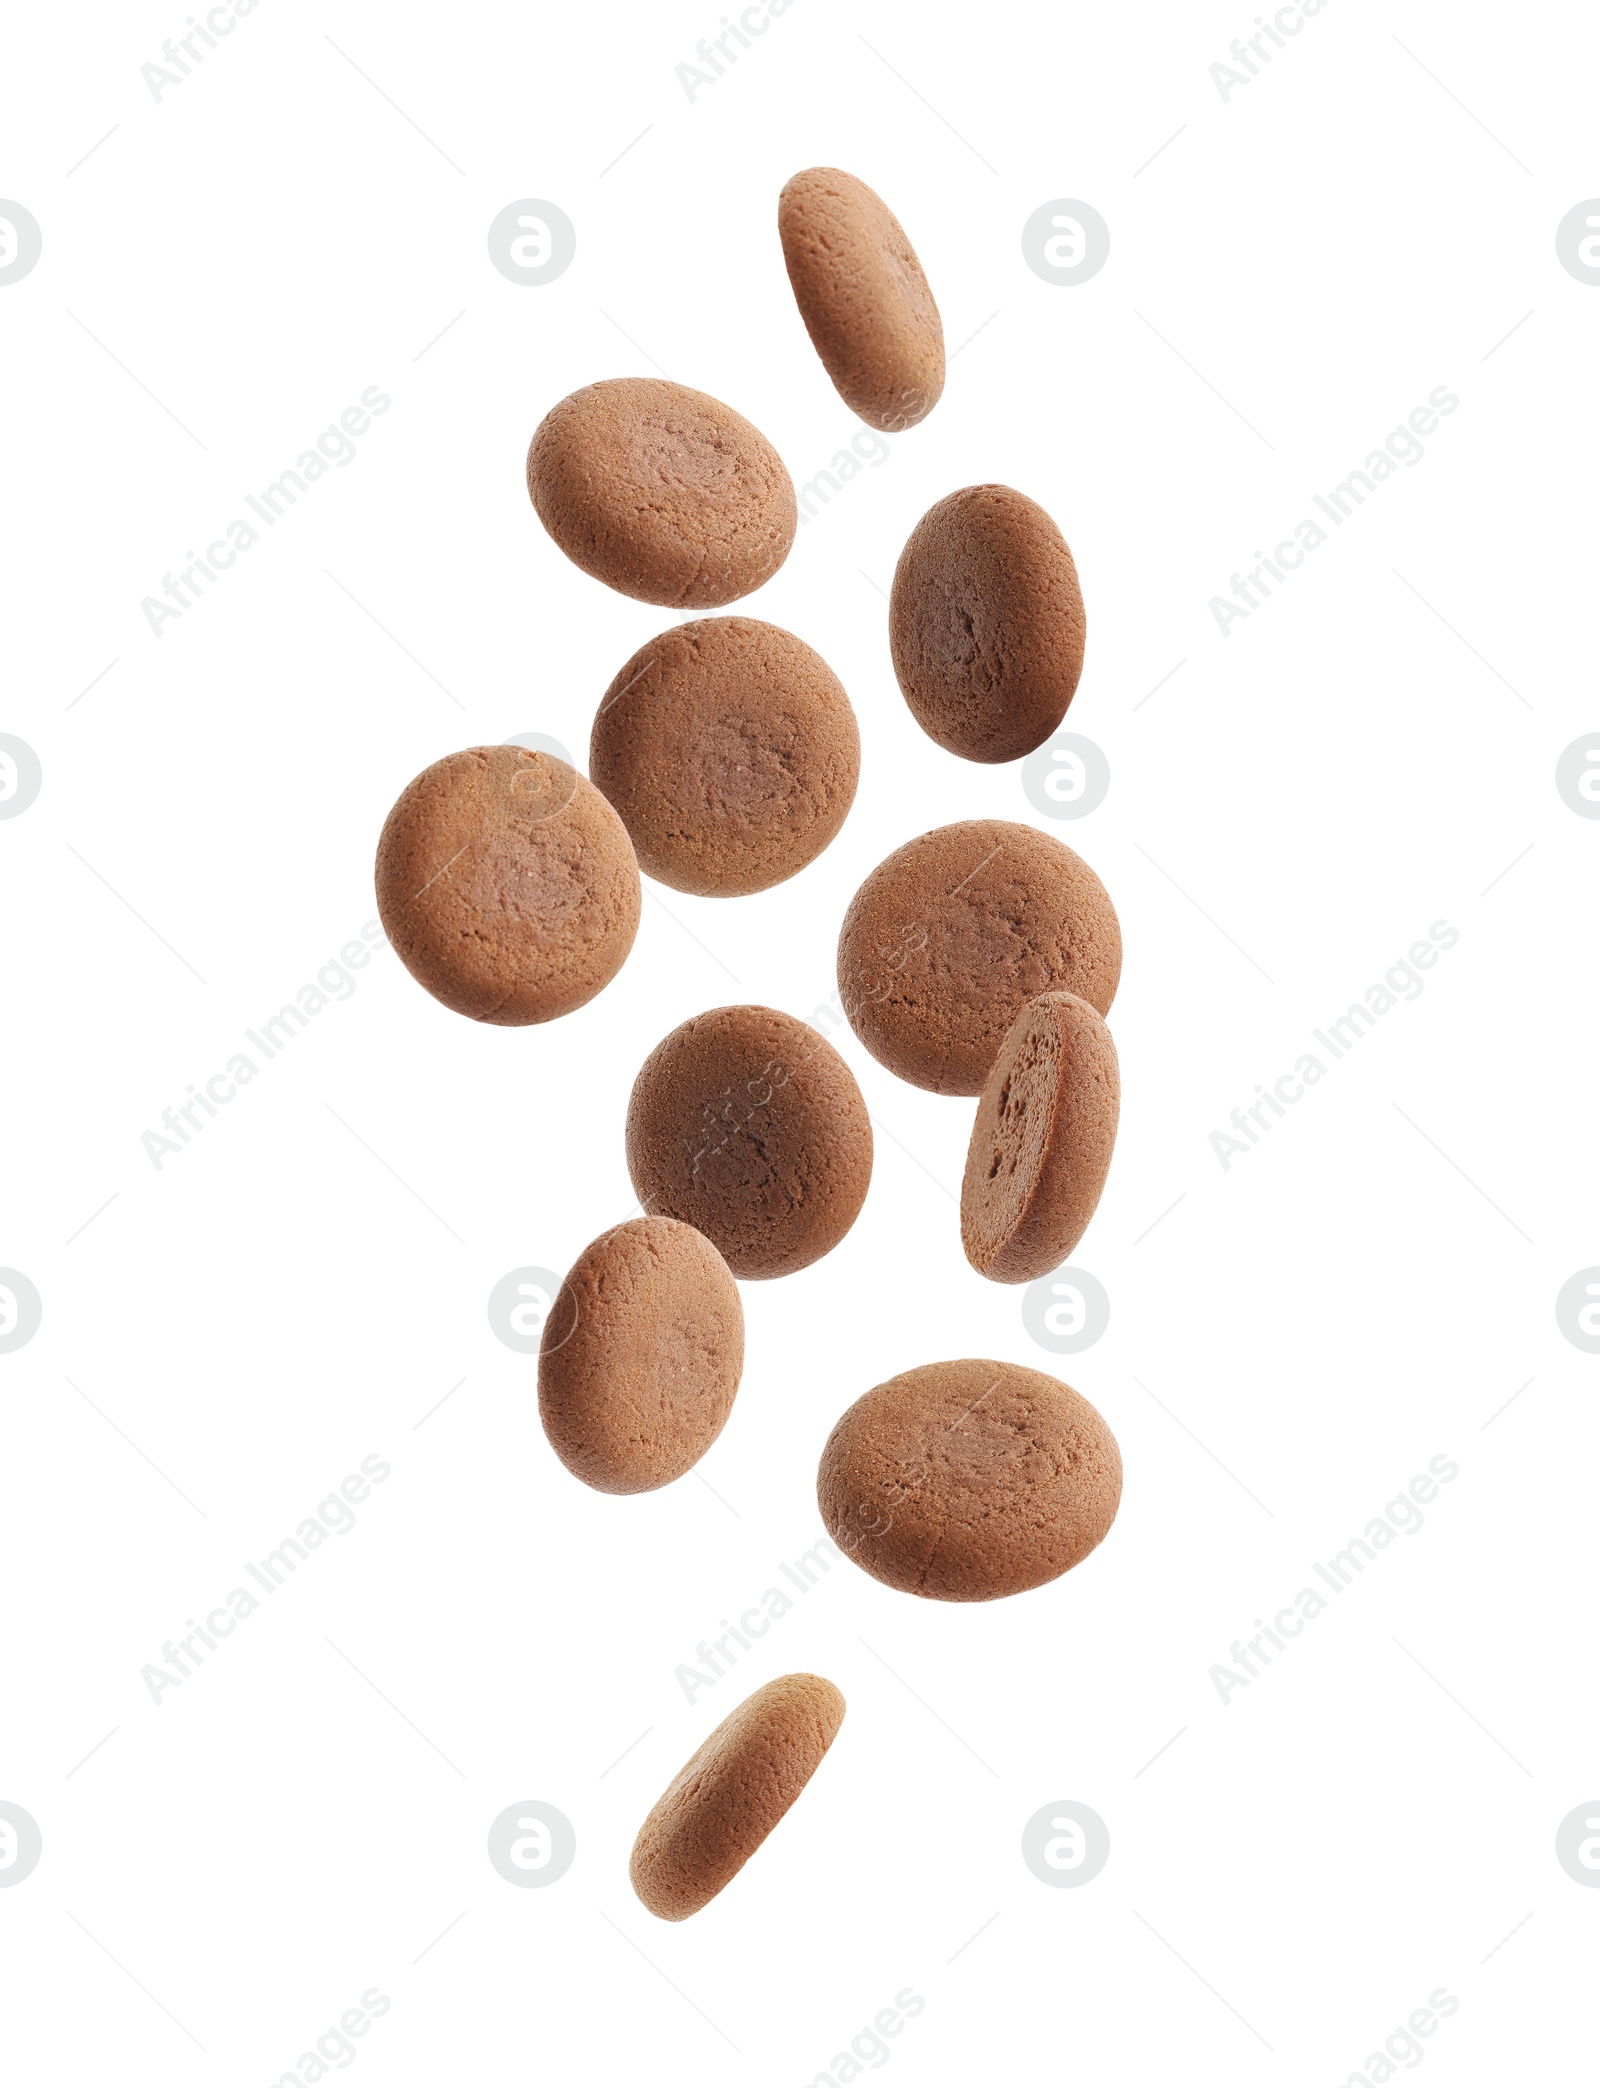 Image of Set of falling delicious chocolate cookies on white background 